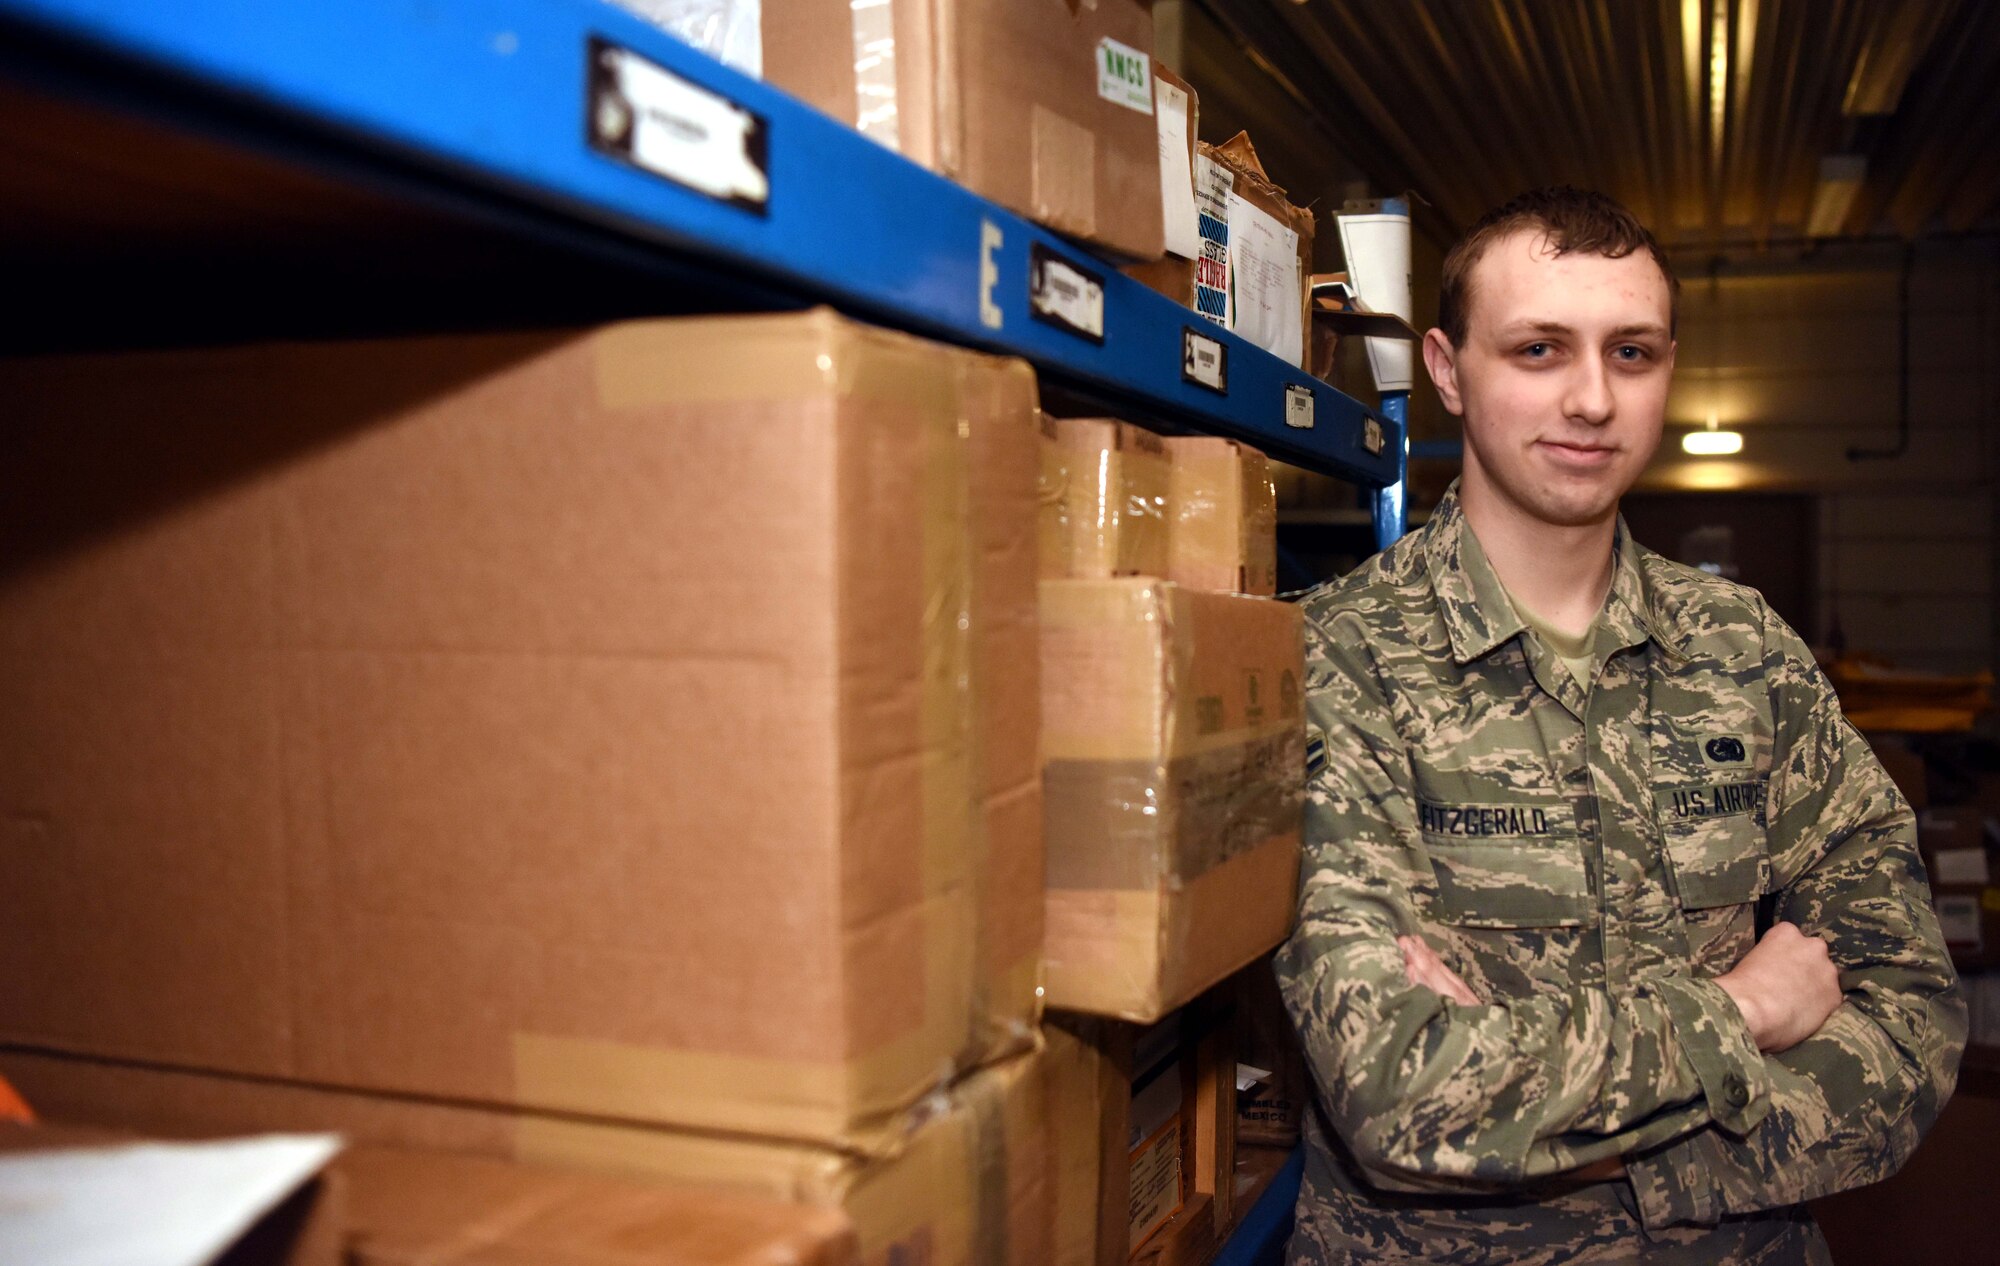 Airman 1st Class Patrick Fitzgerald, 100th Logistics Readiness Squadron flight service center technician, poses for a photo at RAF Mildenhall, England, April 15, 2020. The FSC Airmen are a part of materiel management and are tasked with managing and distributing Air Force assets to various units. (U.S. Air Force photo by Senior Airman Brandon Esau)